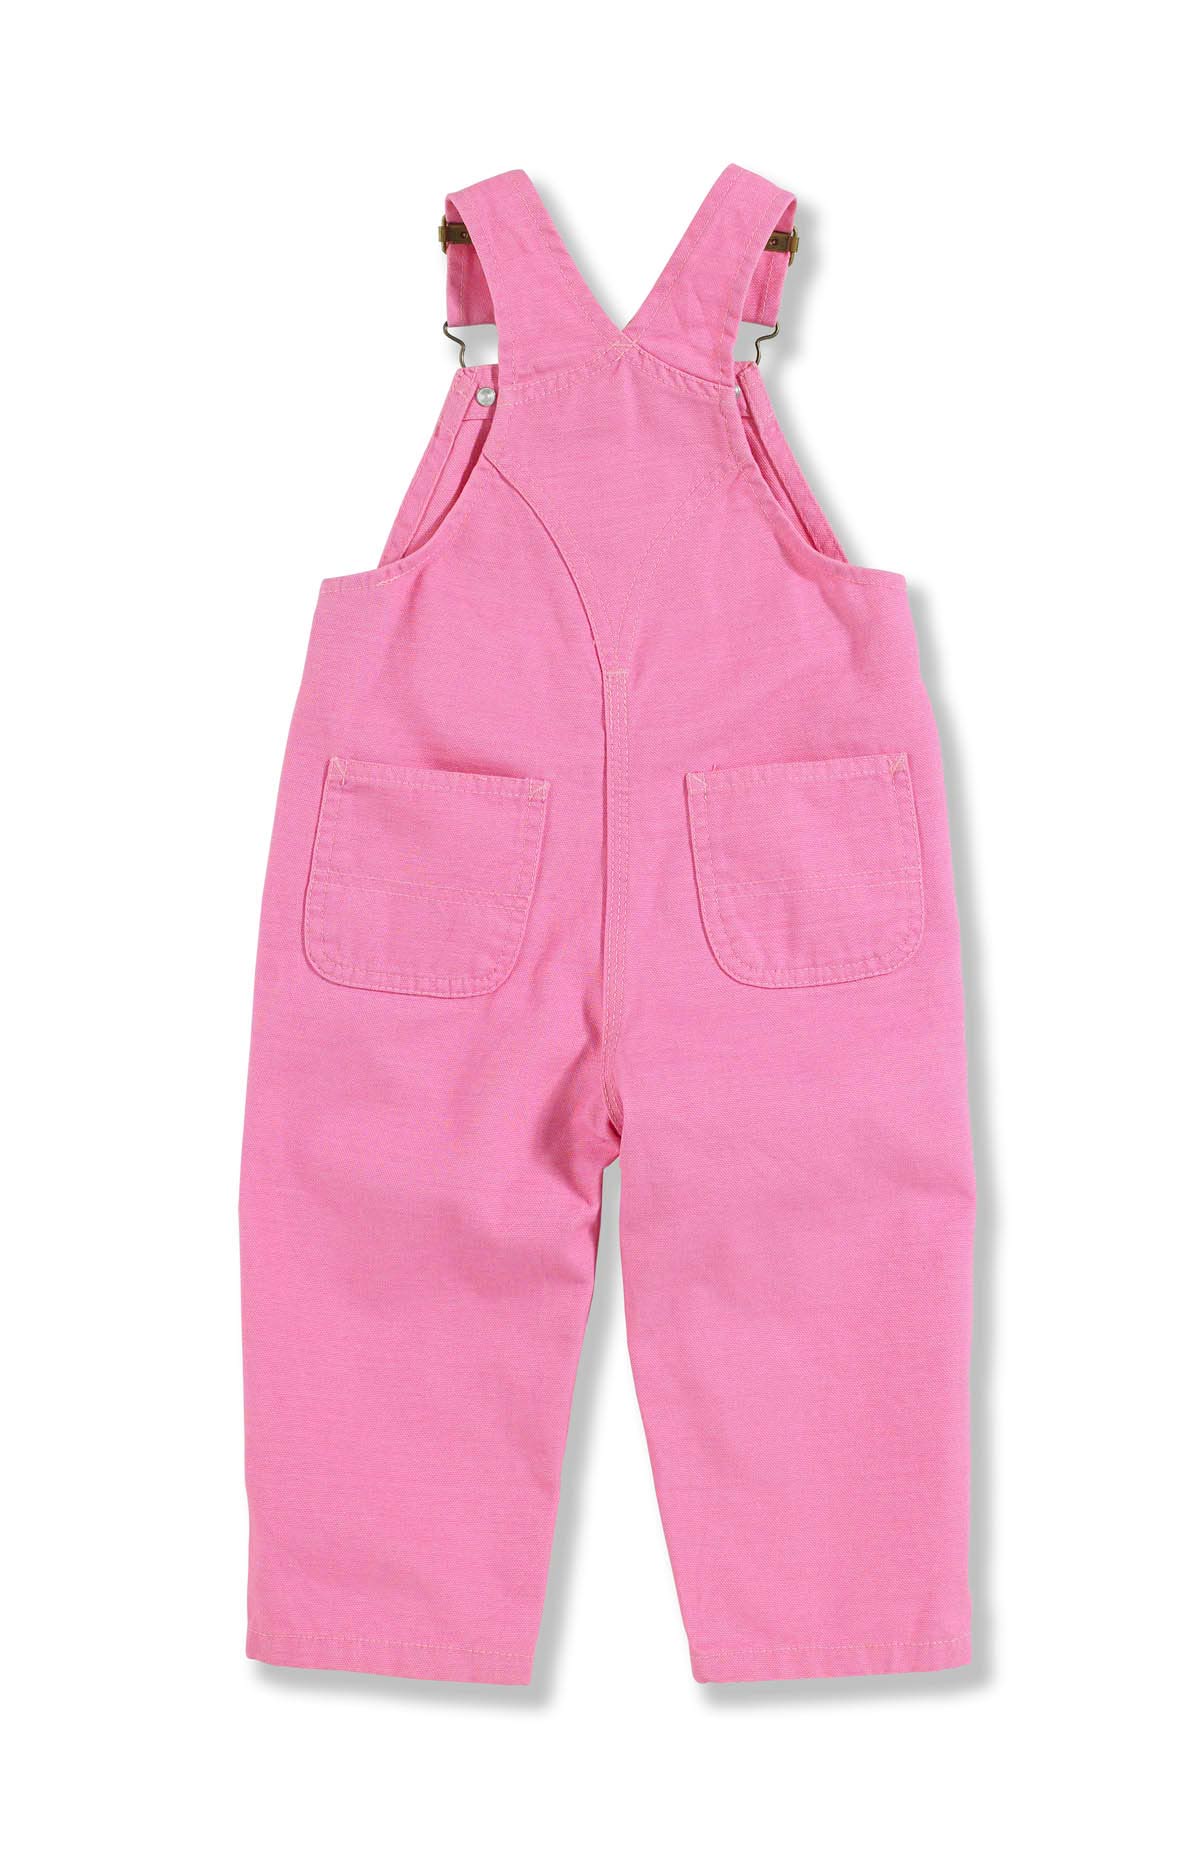 Carhartt Infant Girls' Washed Microsanded Canvas Bib Overall